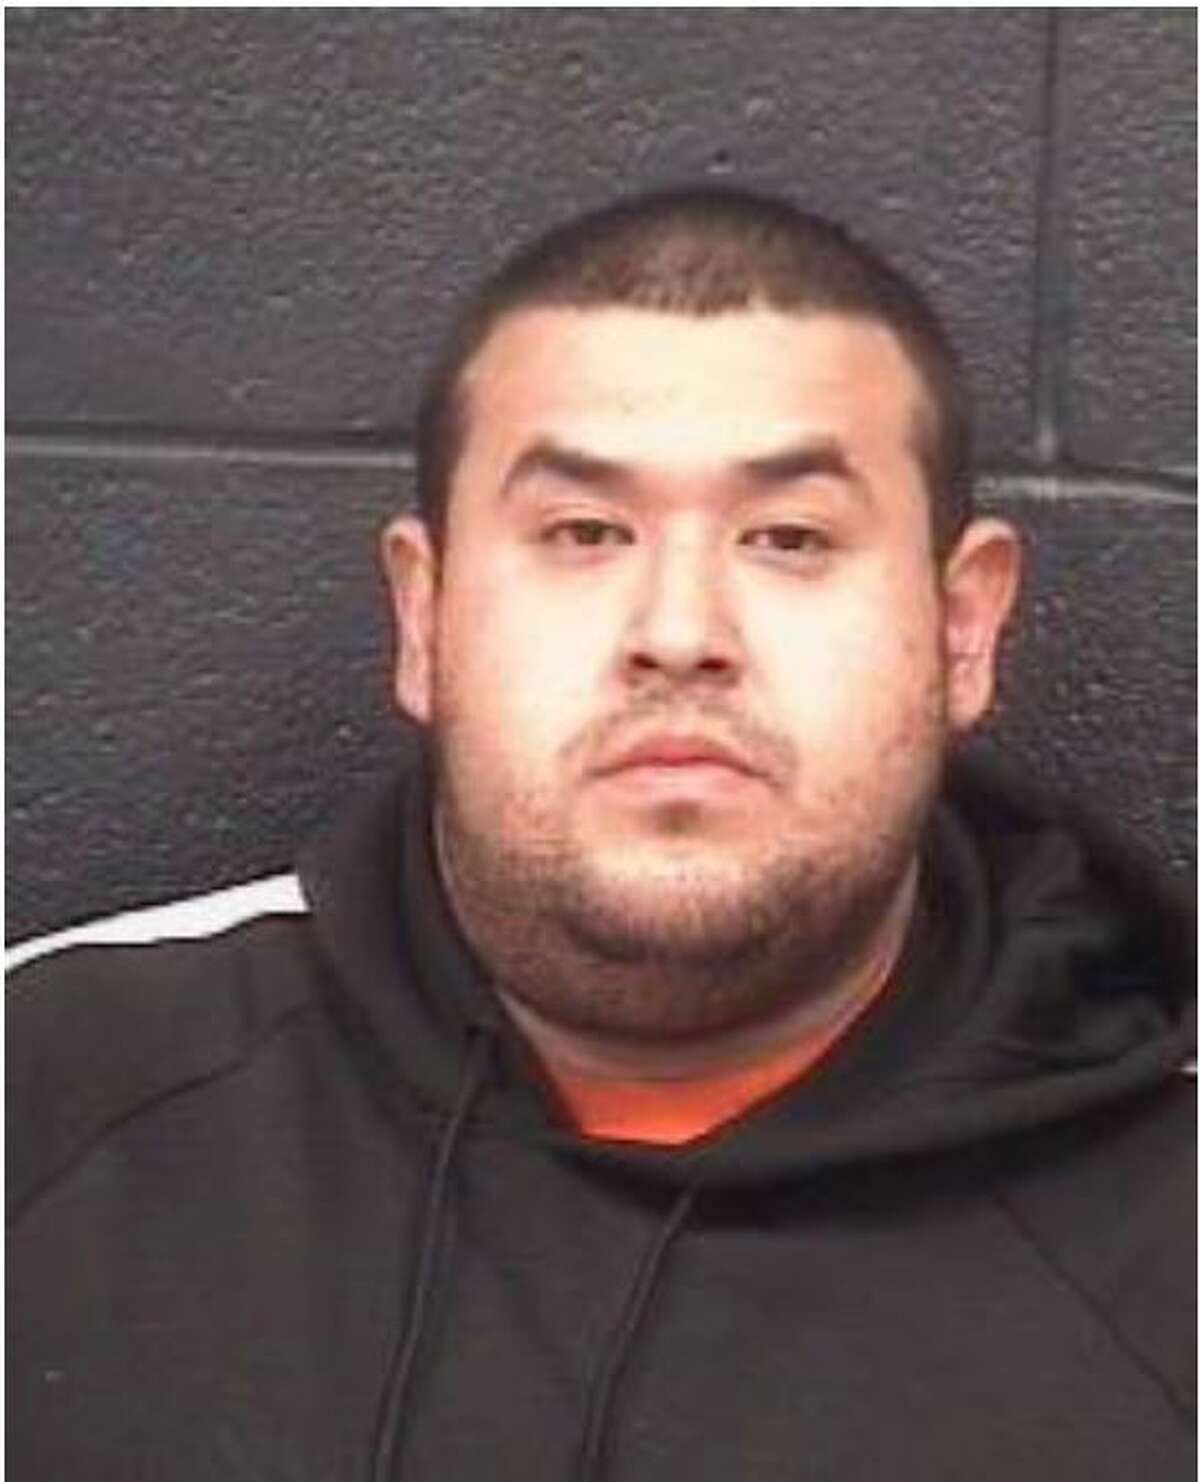 Eduardo Ruelas was charged with driving while intoxicated